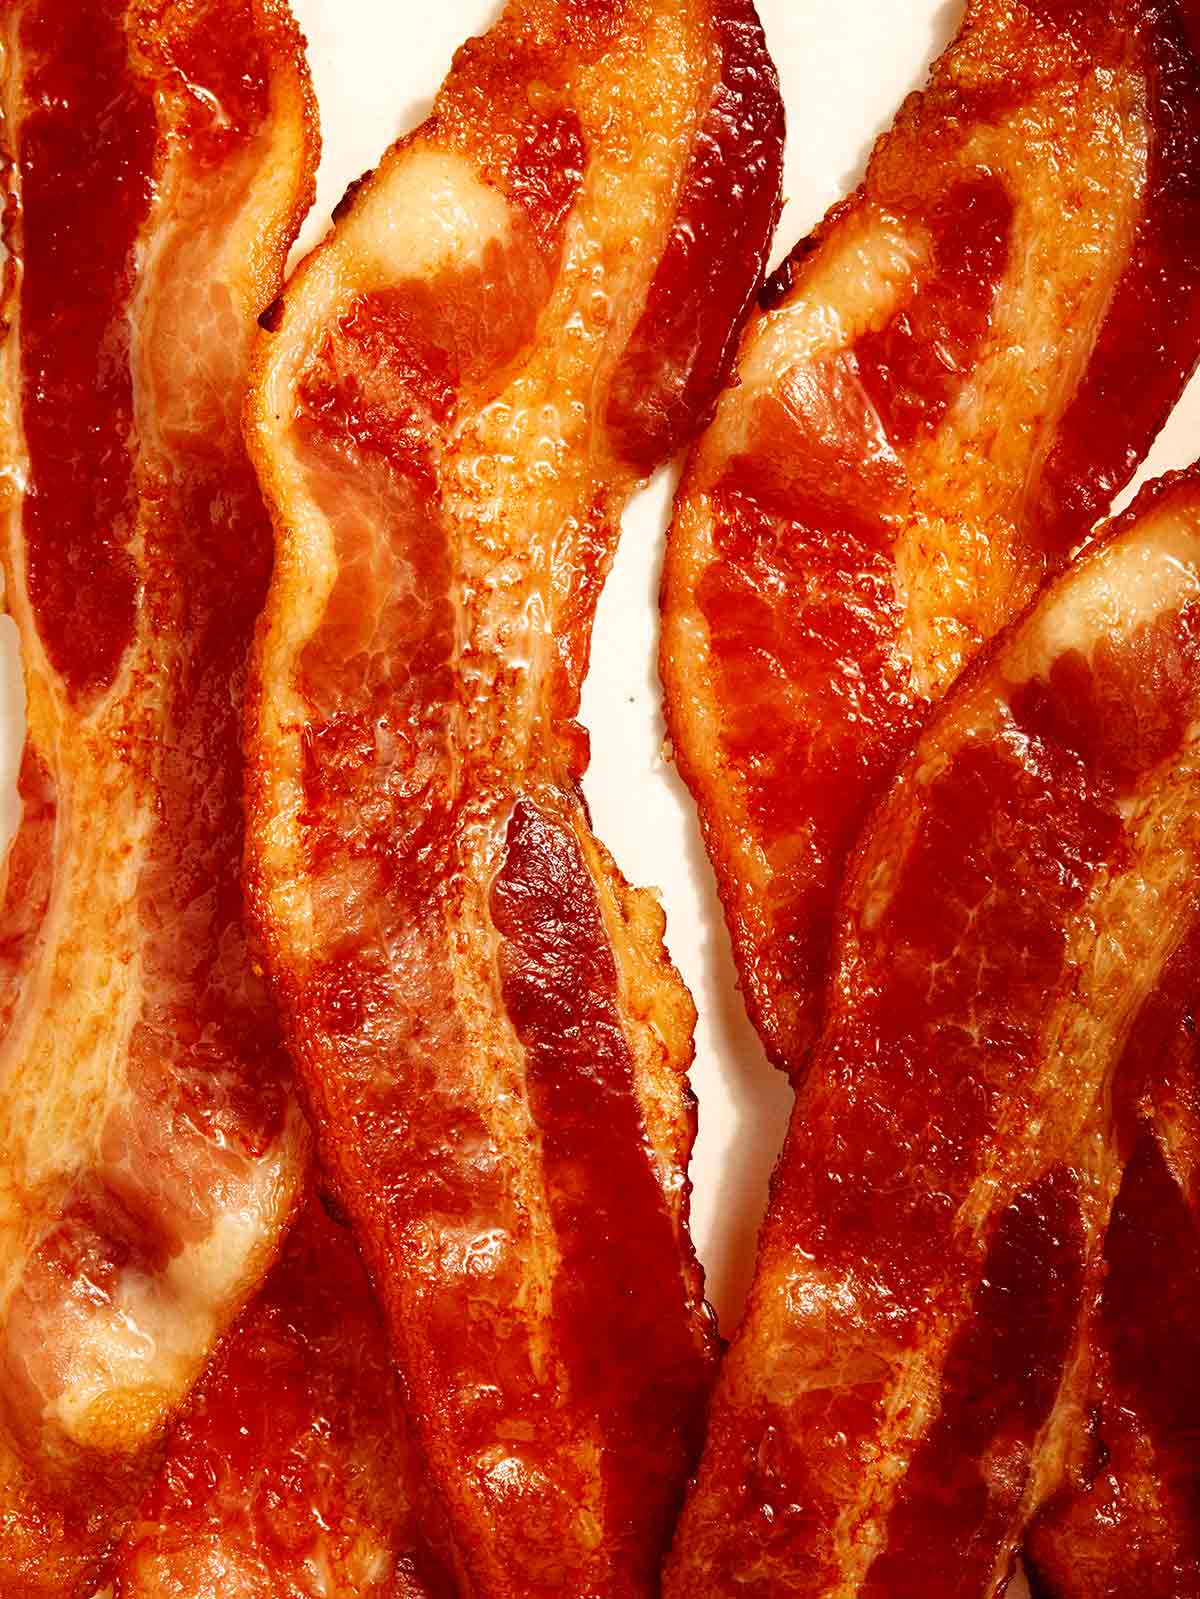 Cooked bacon up close. 